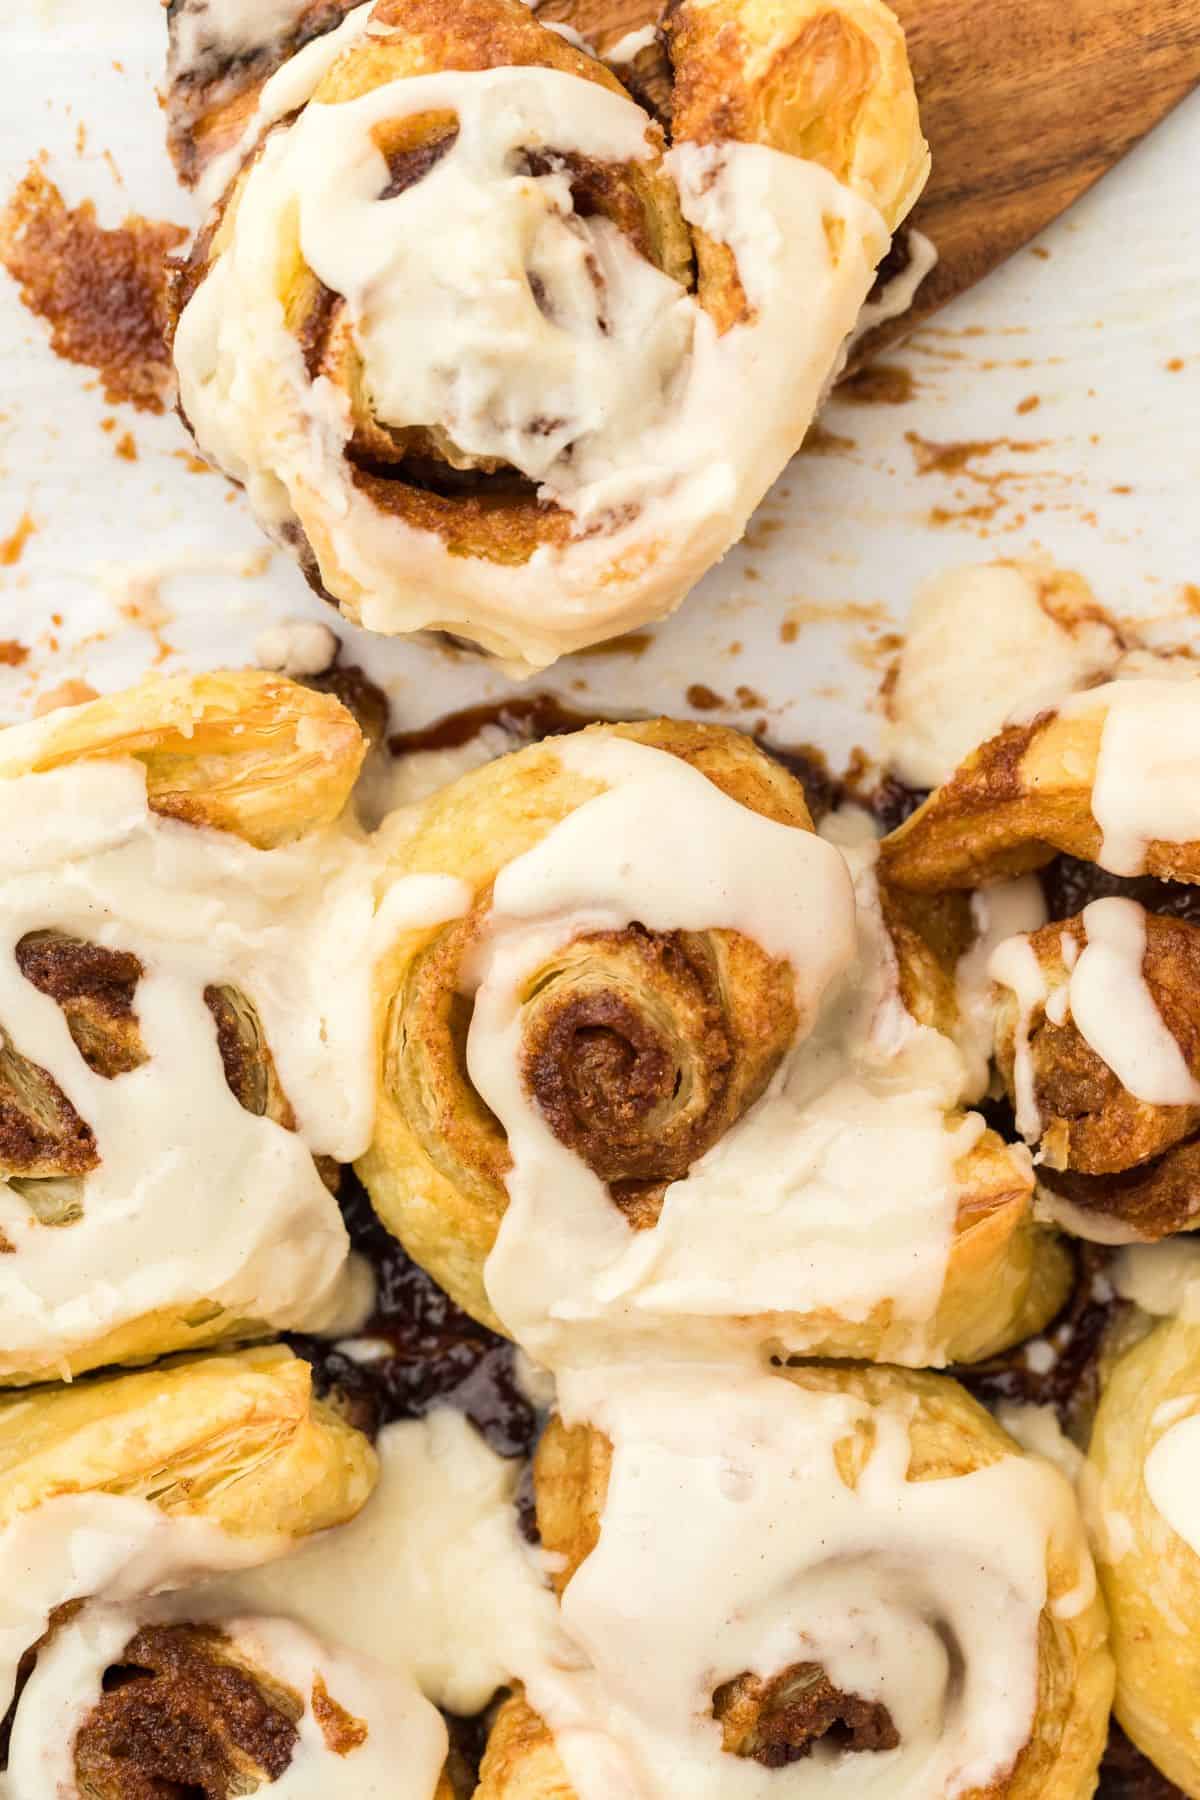 Easy cinnamon rolls after being baked and covered in glaze ready to serve in the baking pan.